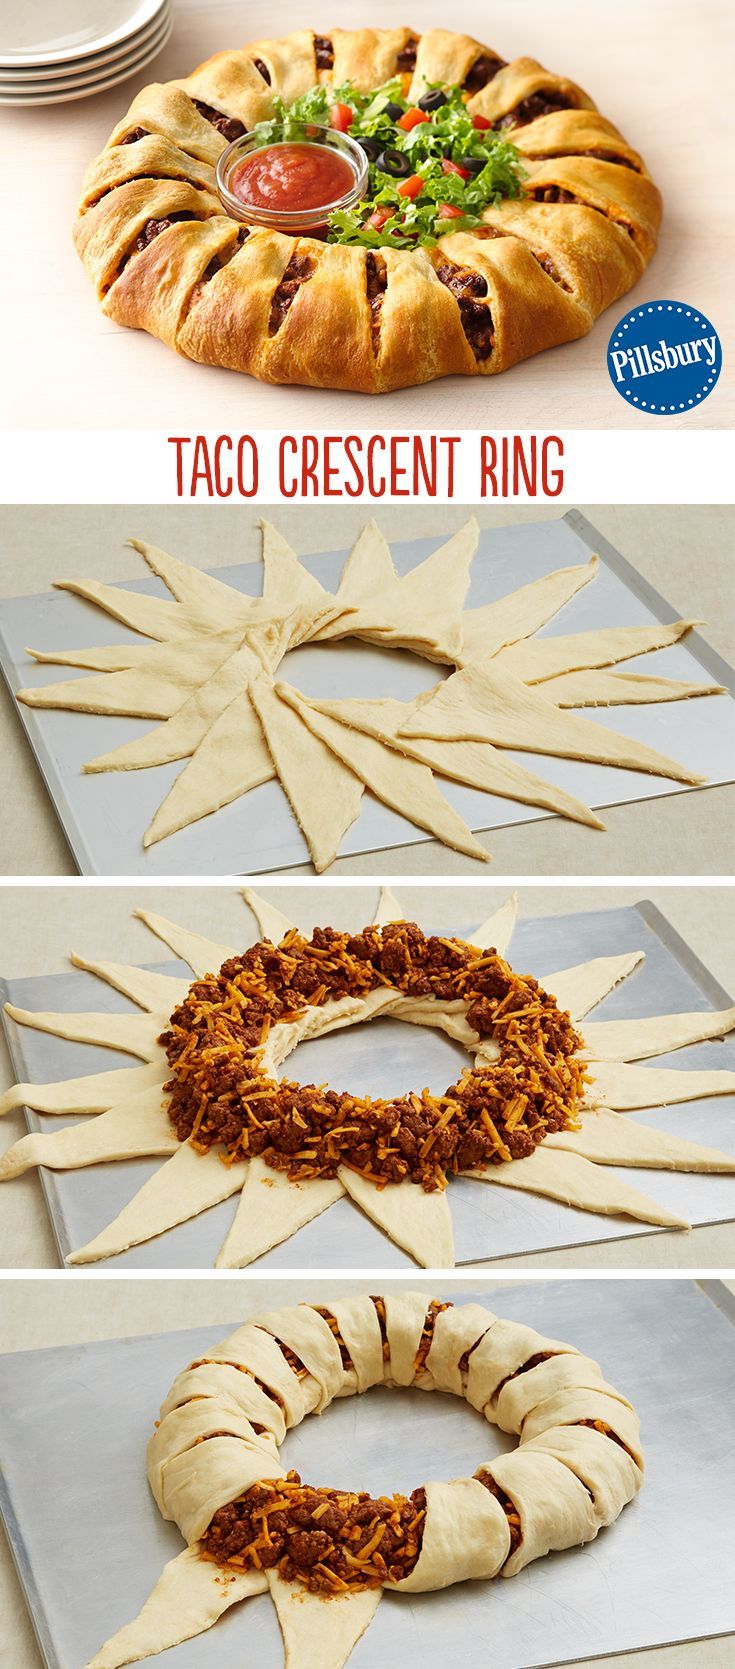 Create a new twist on a classic with this Taco Crescent Ring! Dress it with fresh